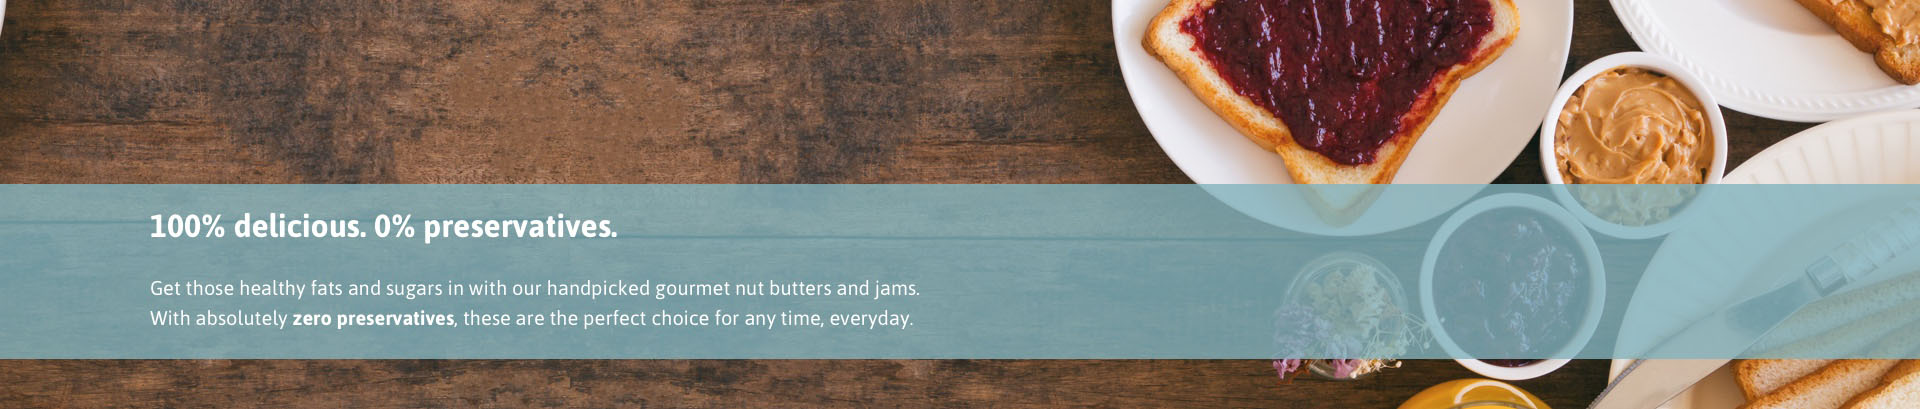 Food for thought - Butters & jams Banner